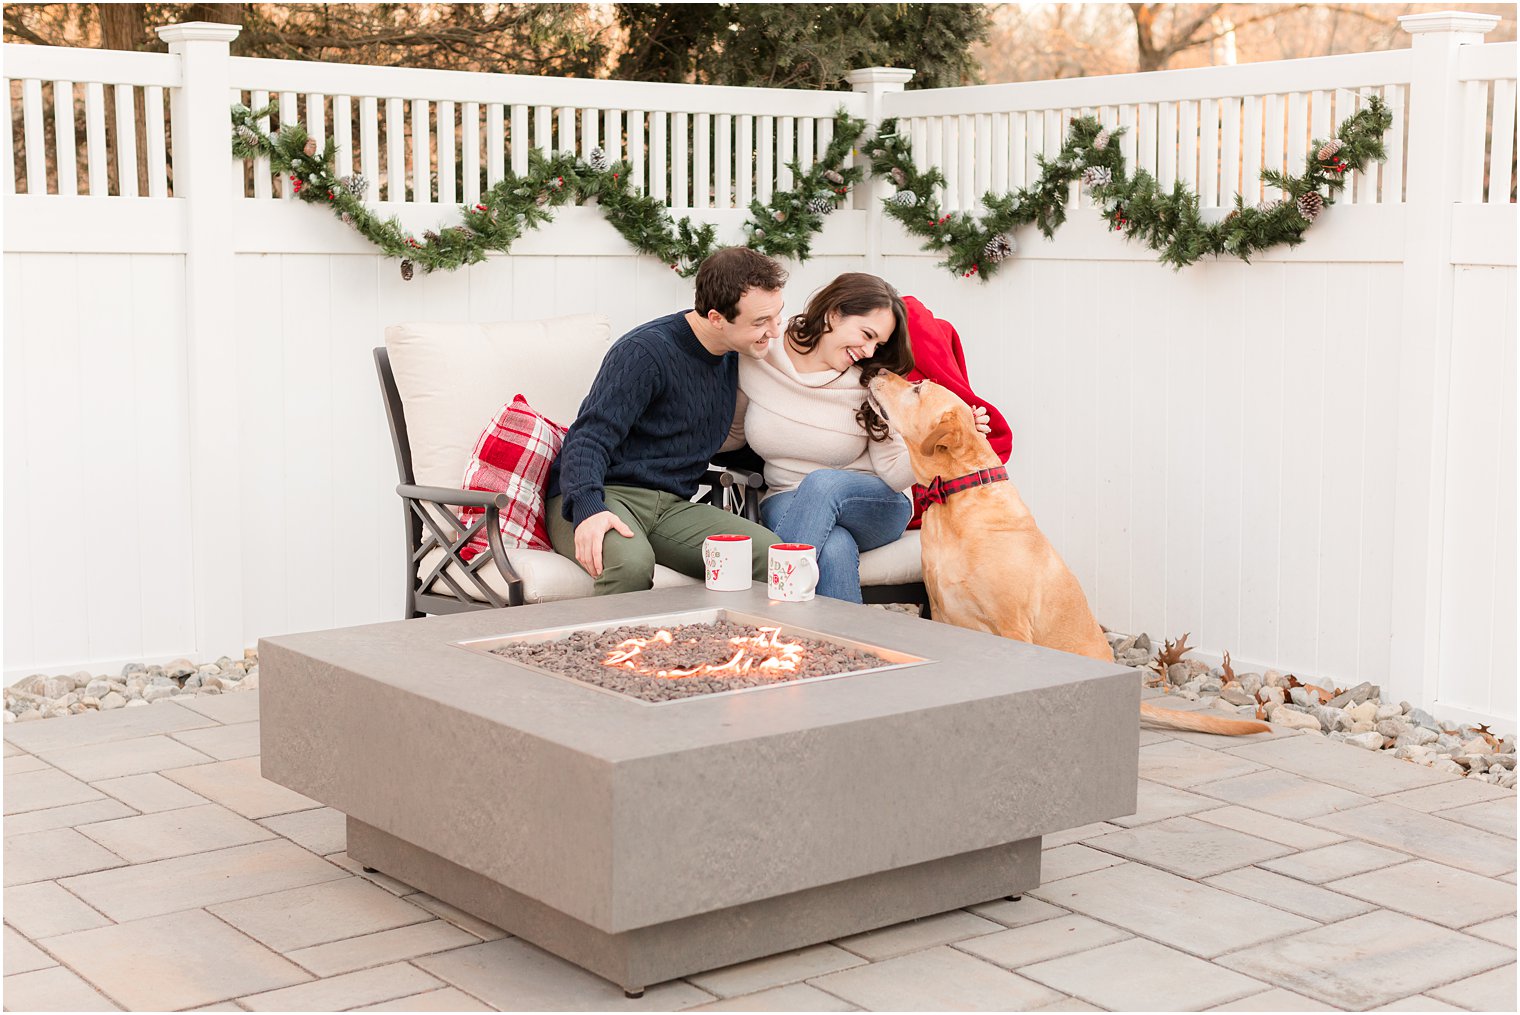 bride and groom sit with dog on patio during holiday inspired engagement session at home 